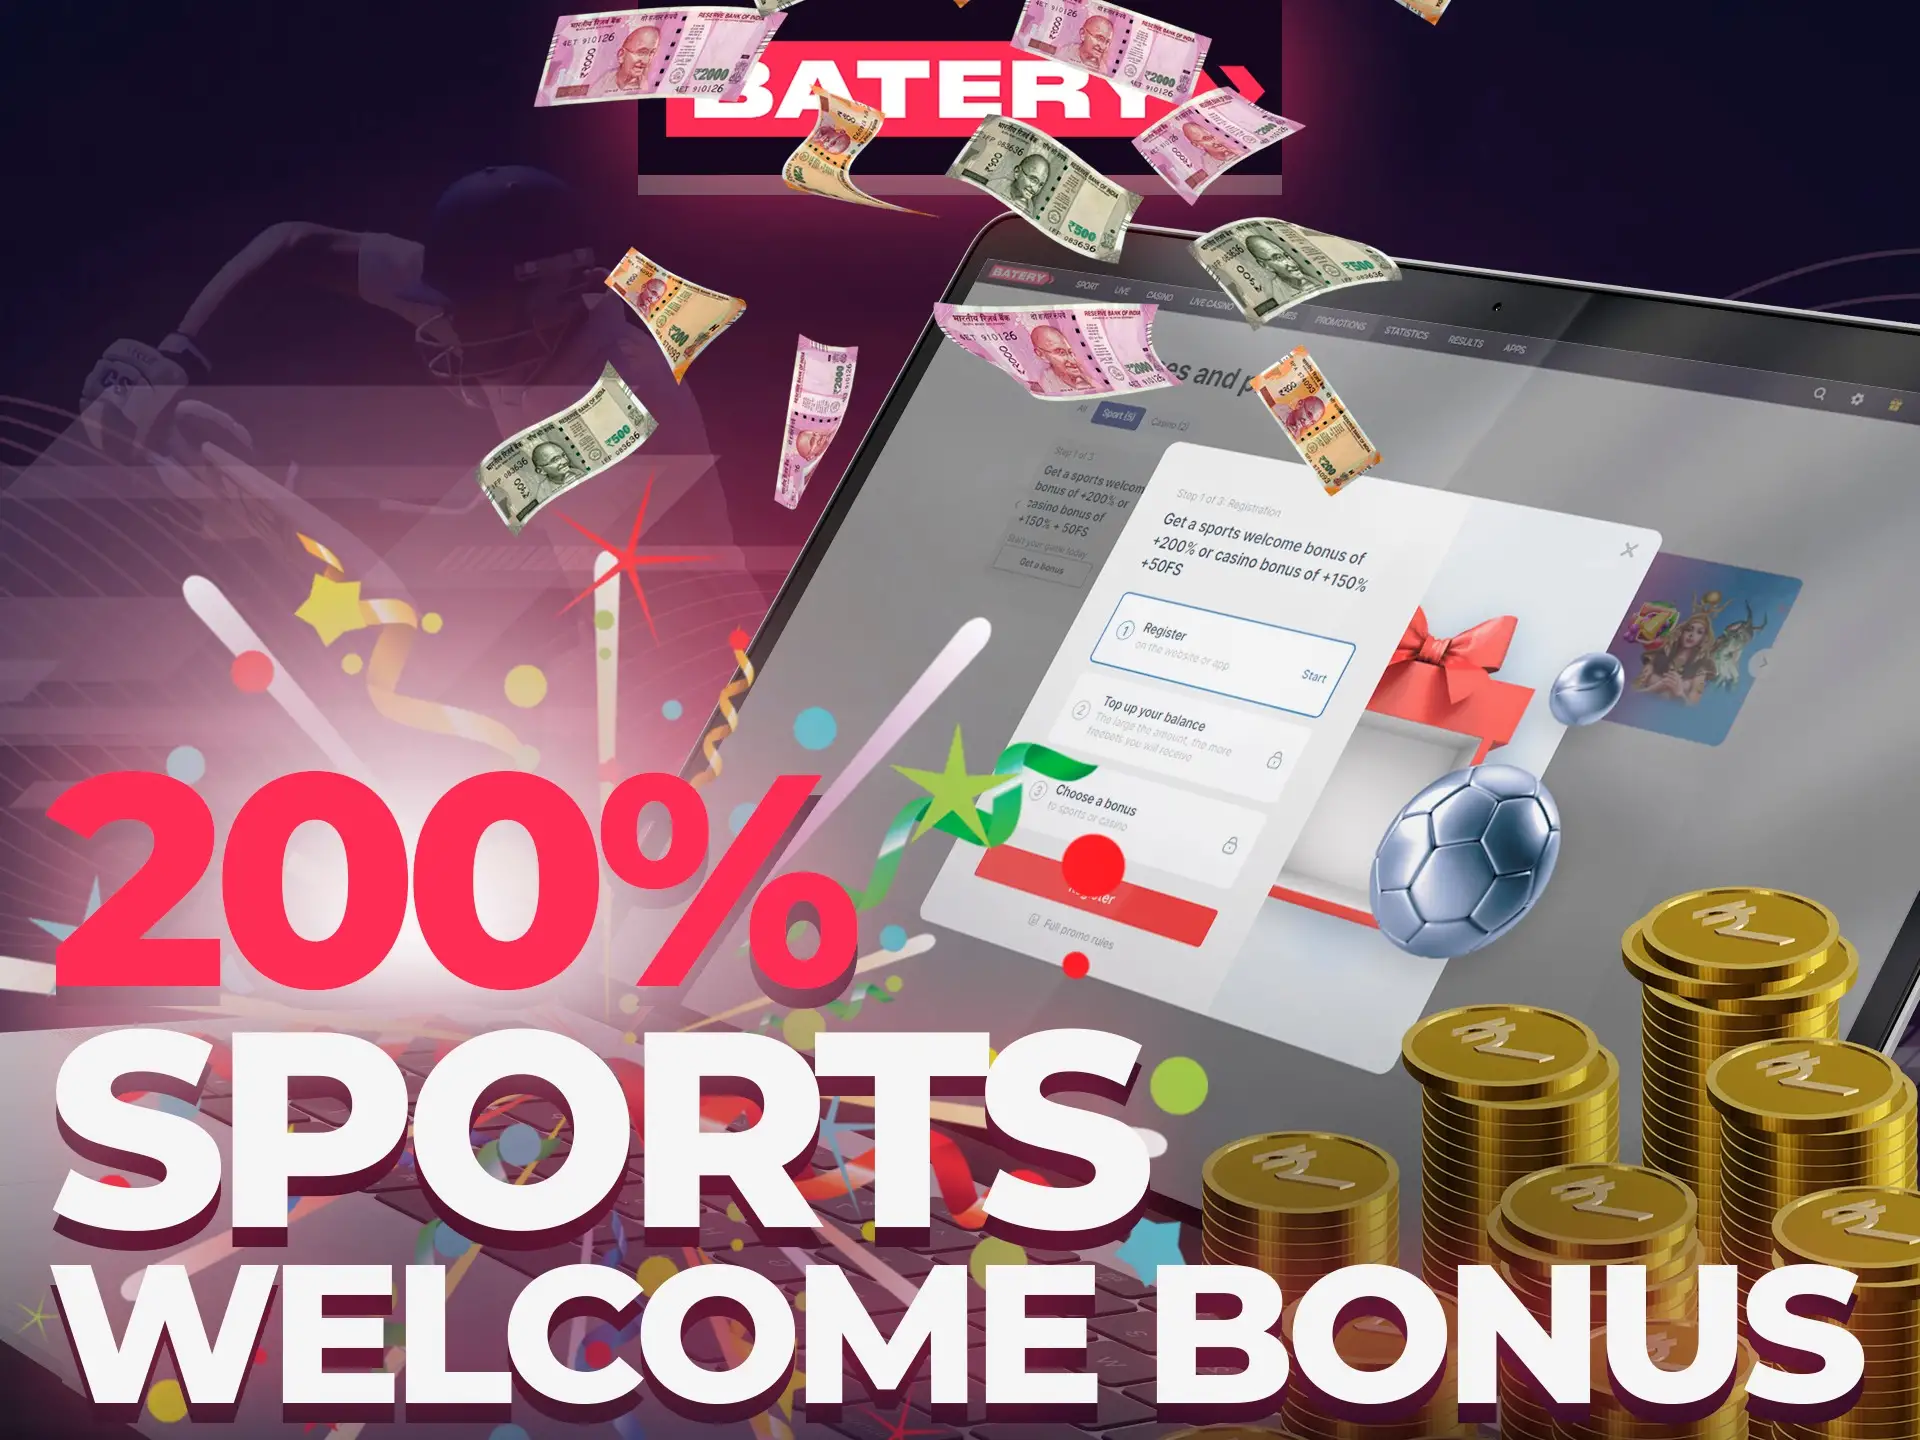 Make first deposit after registration at Batery and get your sports bonus.